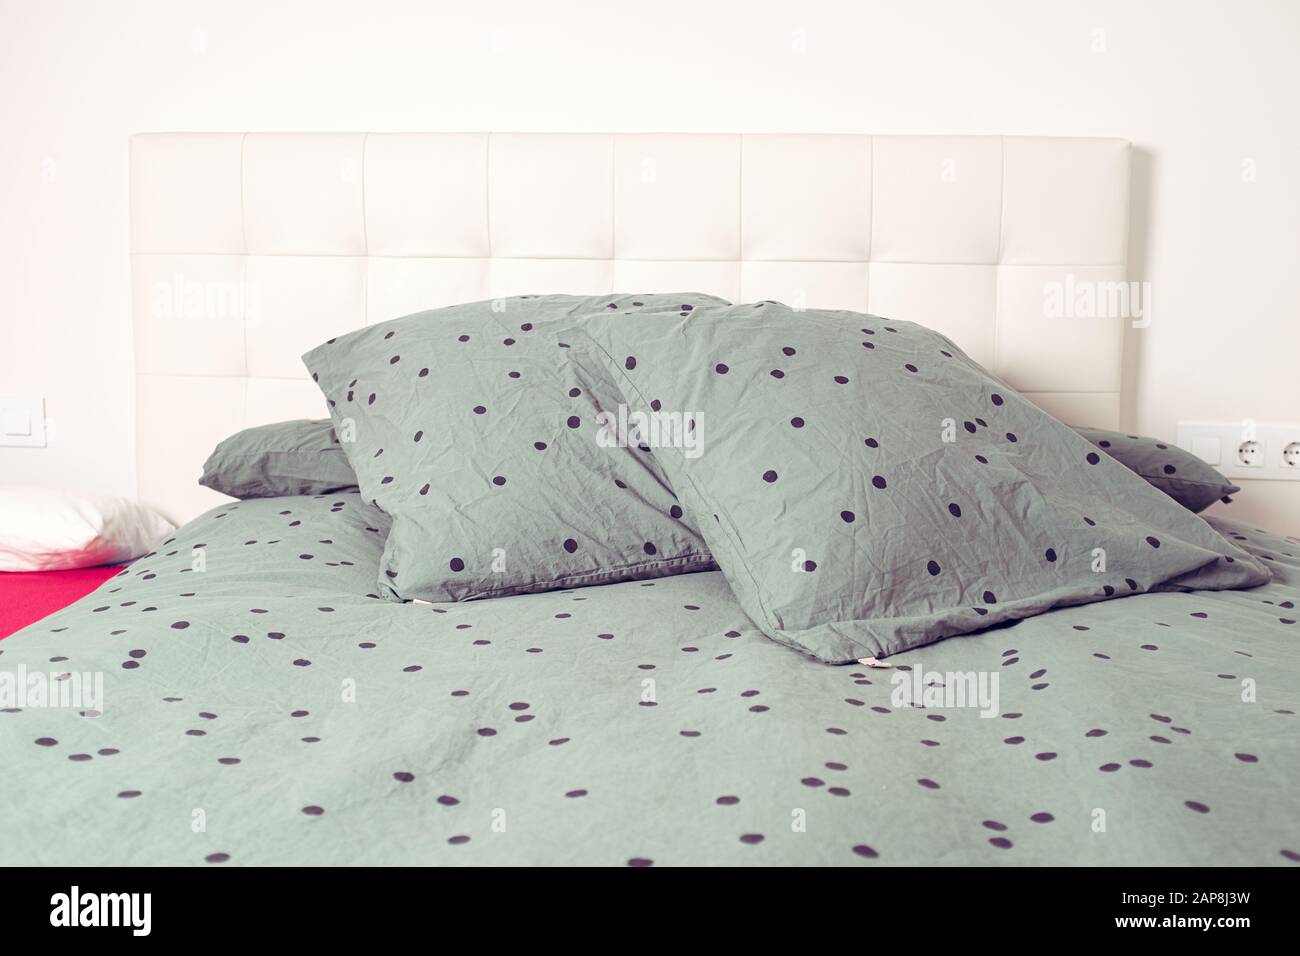 Green pillow and sheets with black spots on an interior bedroom home scene Stock Photo